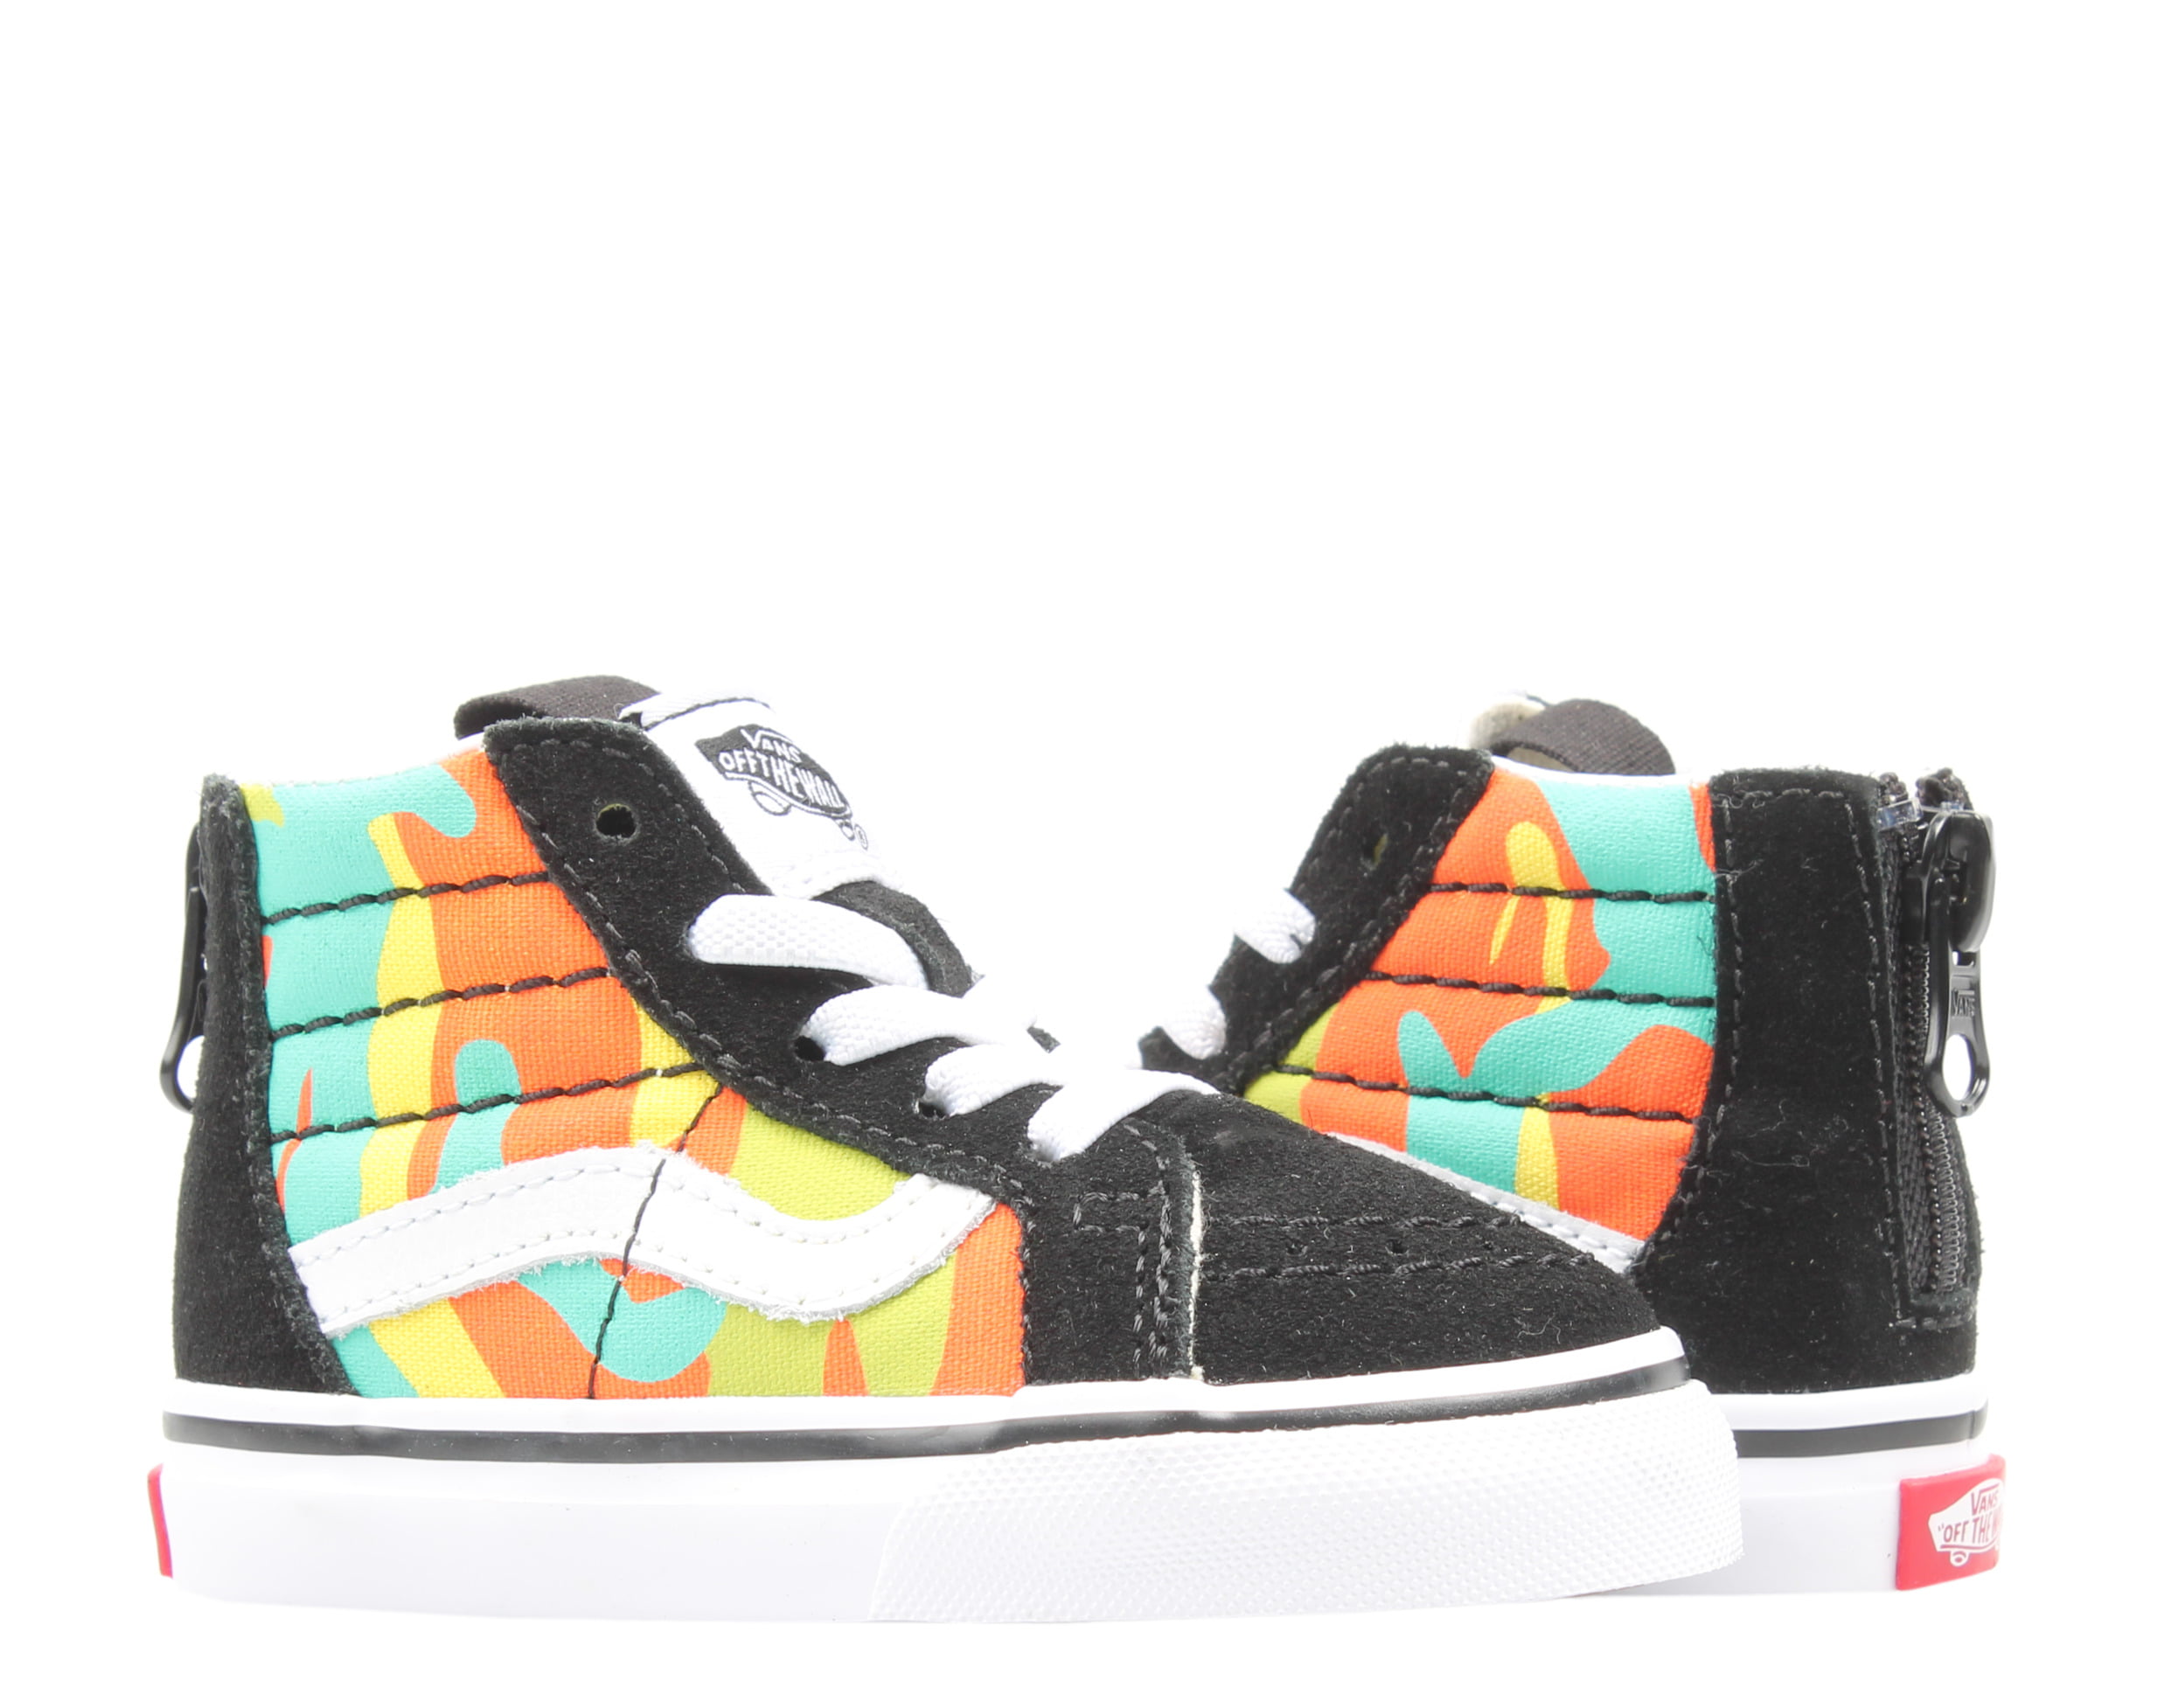 youth vans high tops